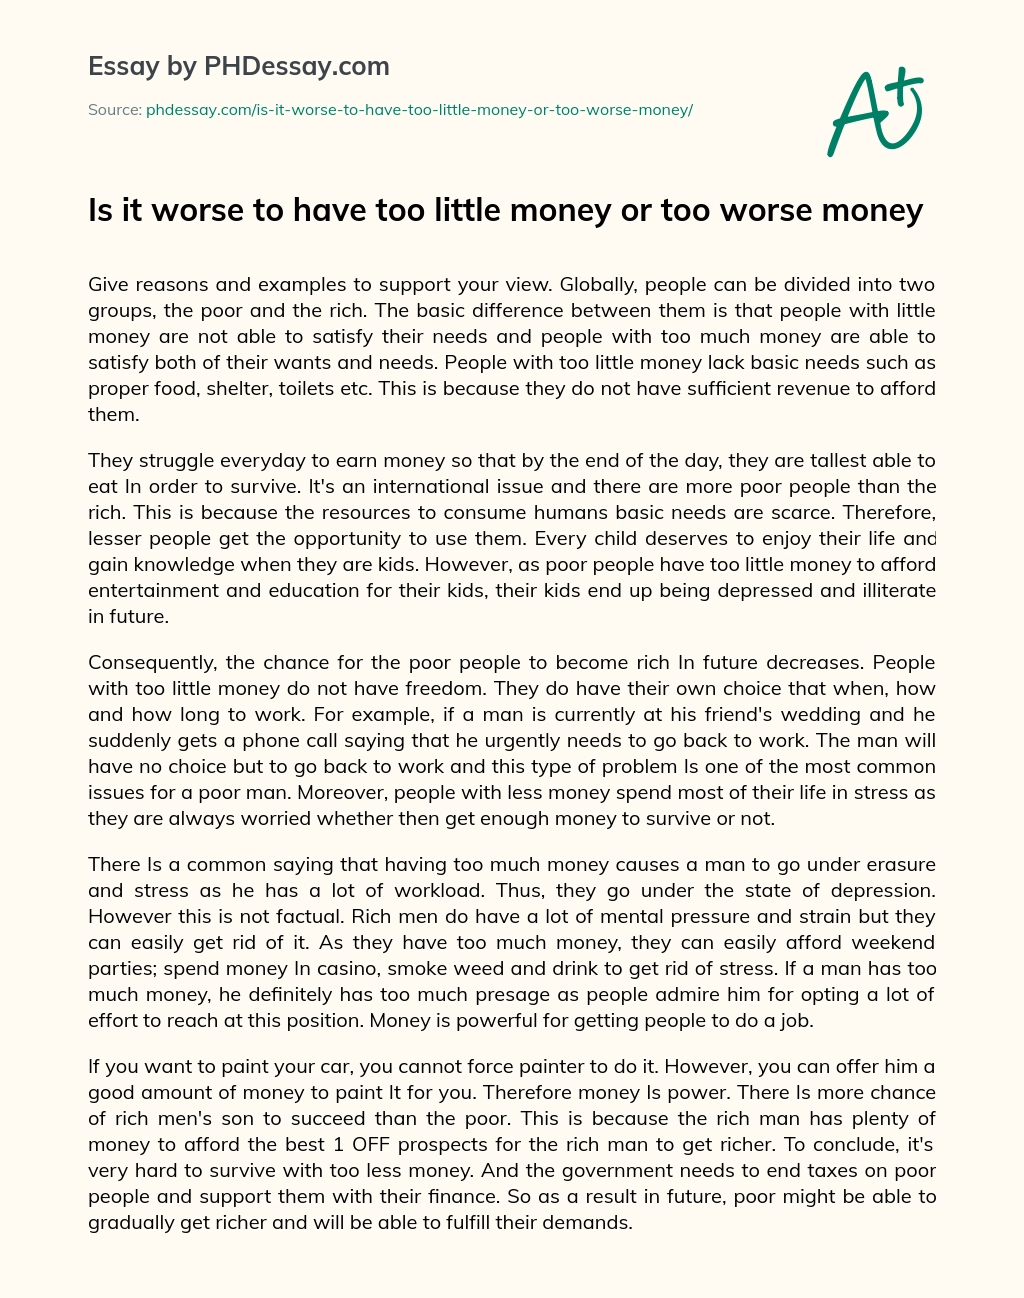 Is it worse to have too little money or too worse money essay